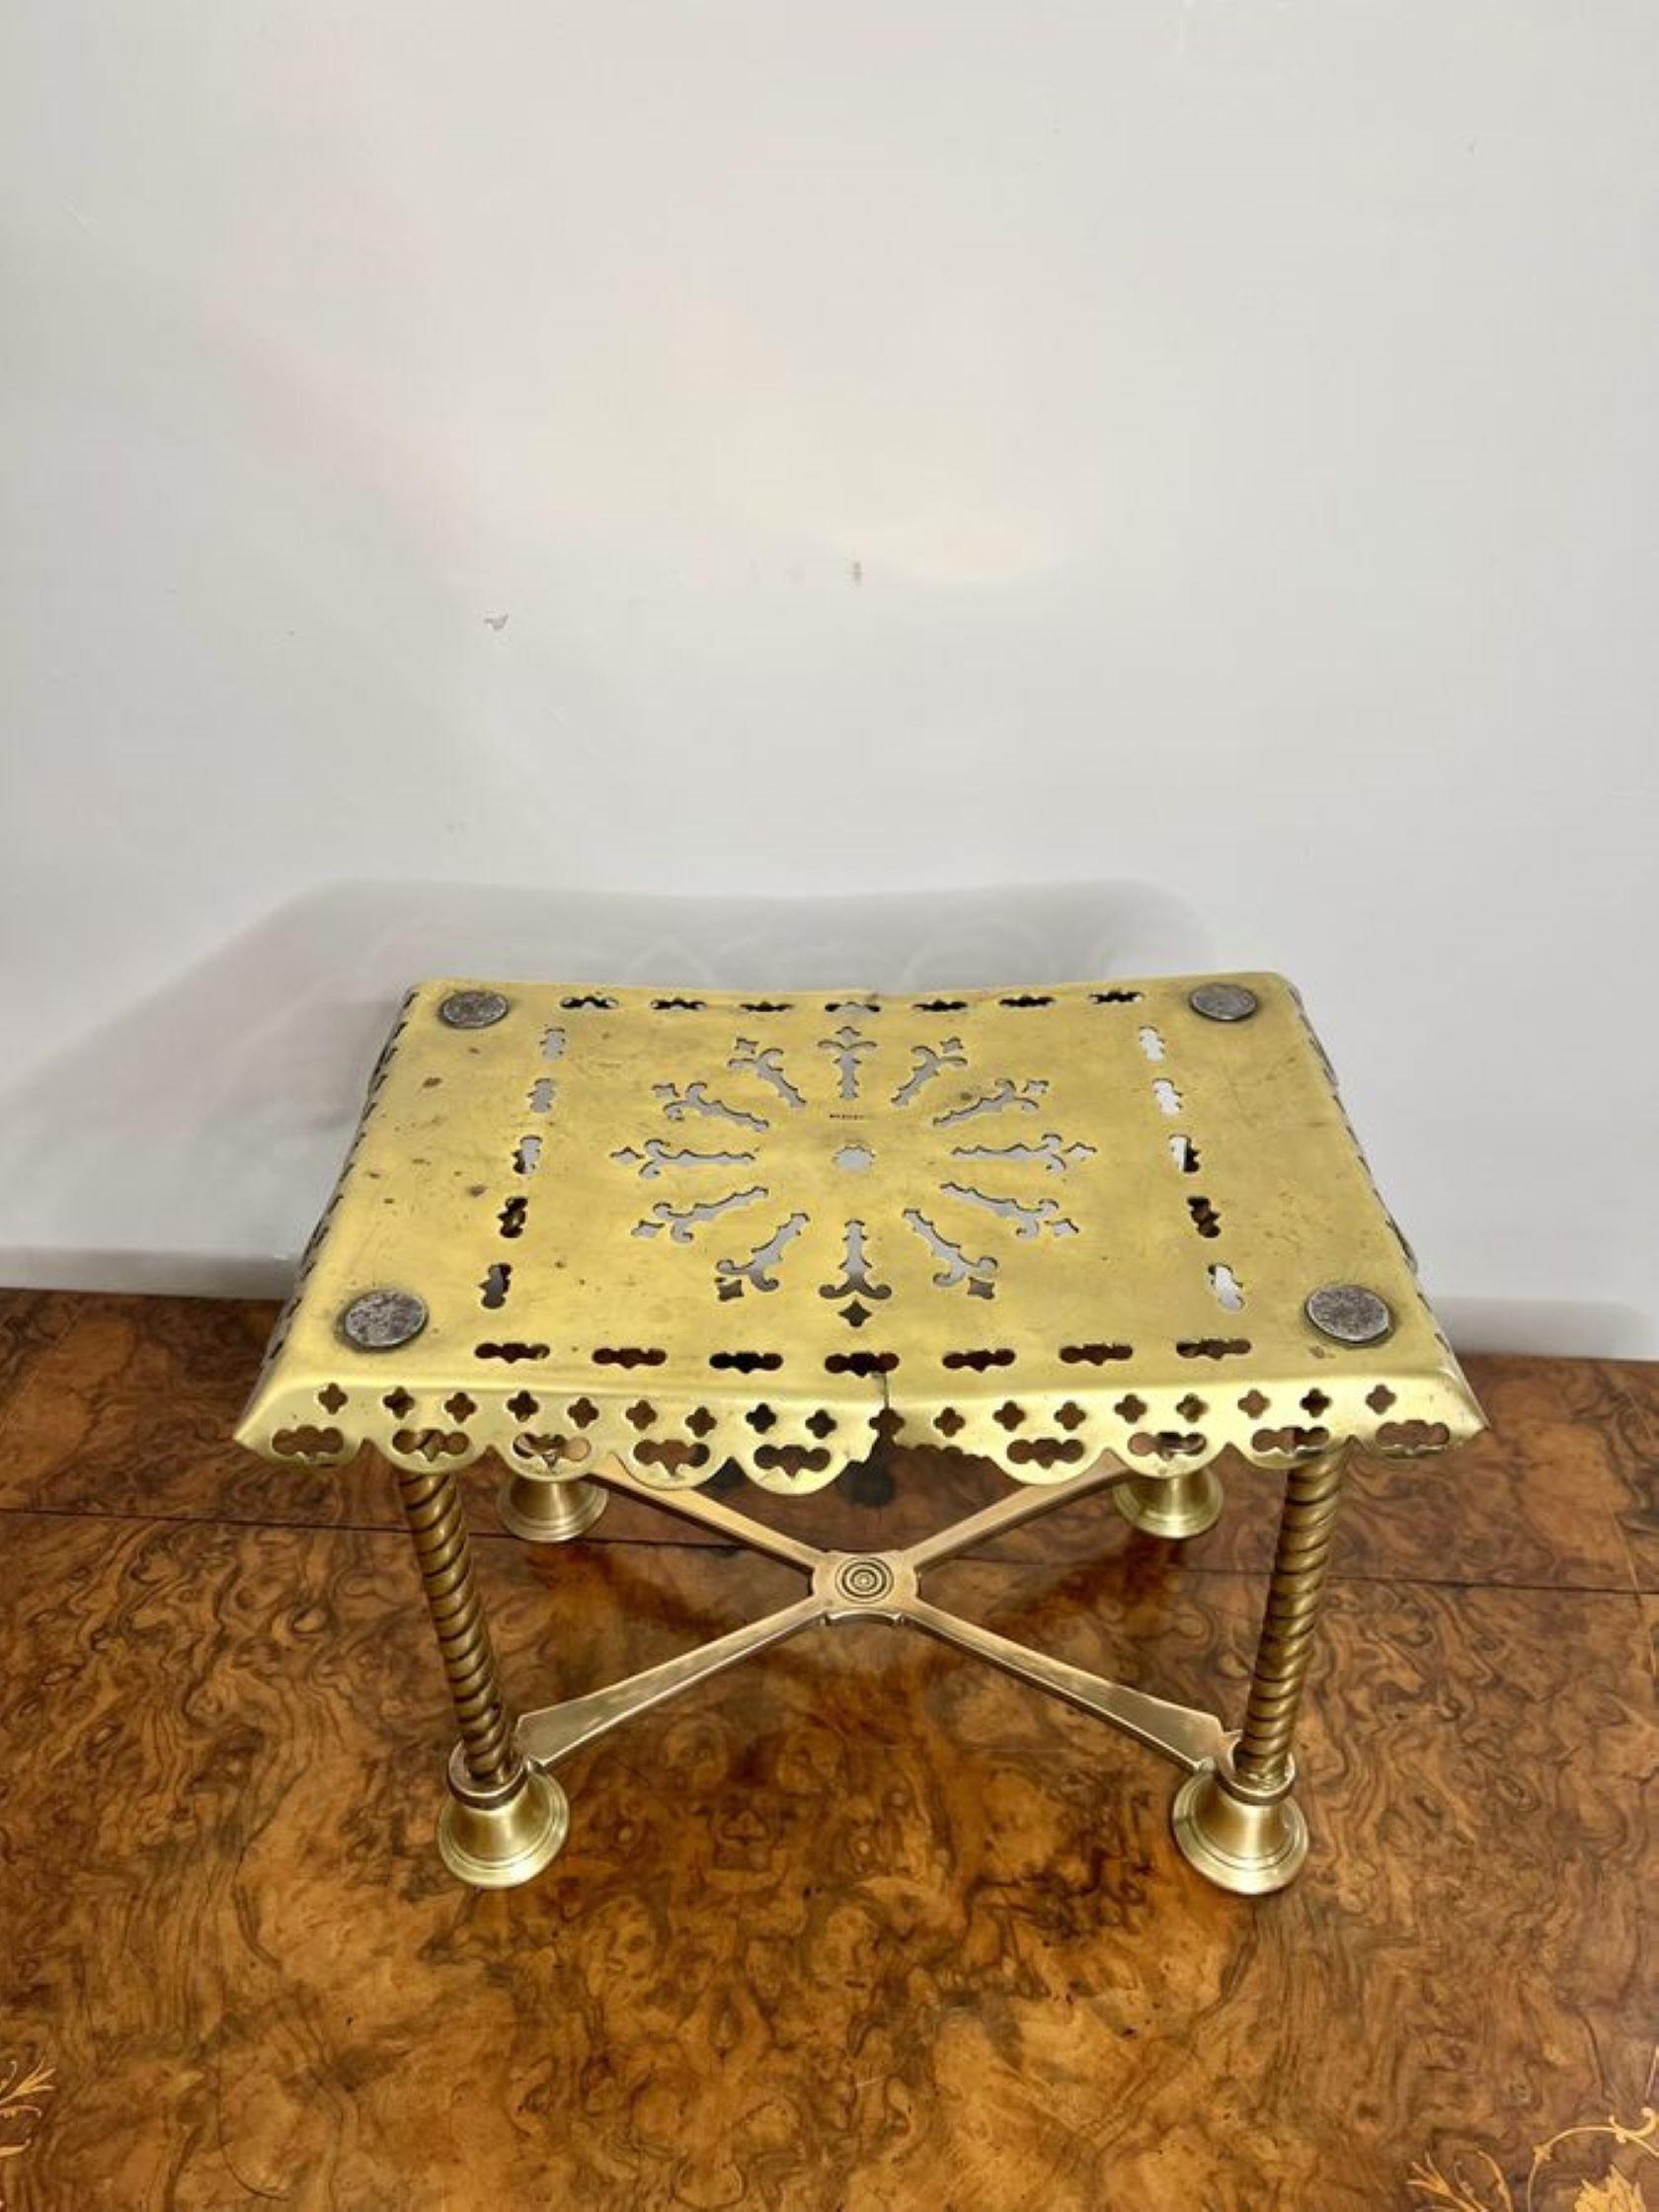 Quality antique Edwardian large brass trivet having a quality antique Edwardian large brass trivet raised on four twist legs with shaped feet.

D. 1900